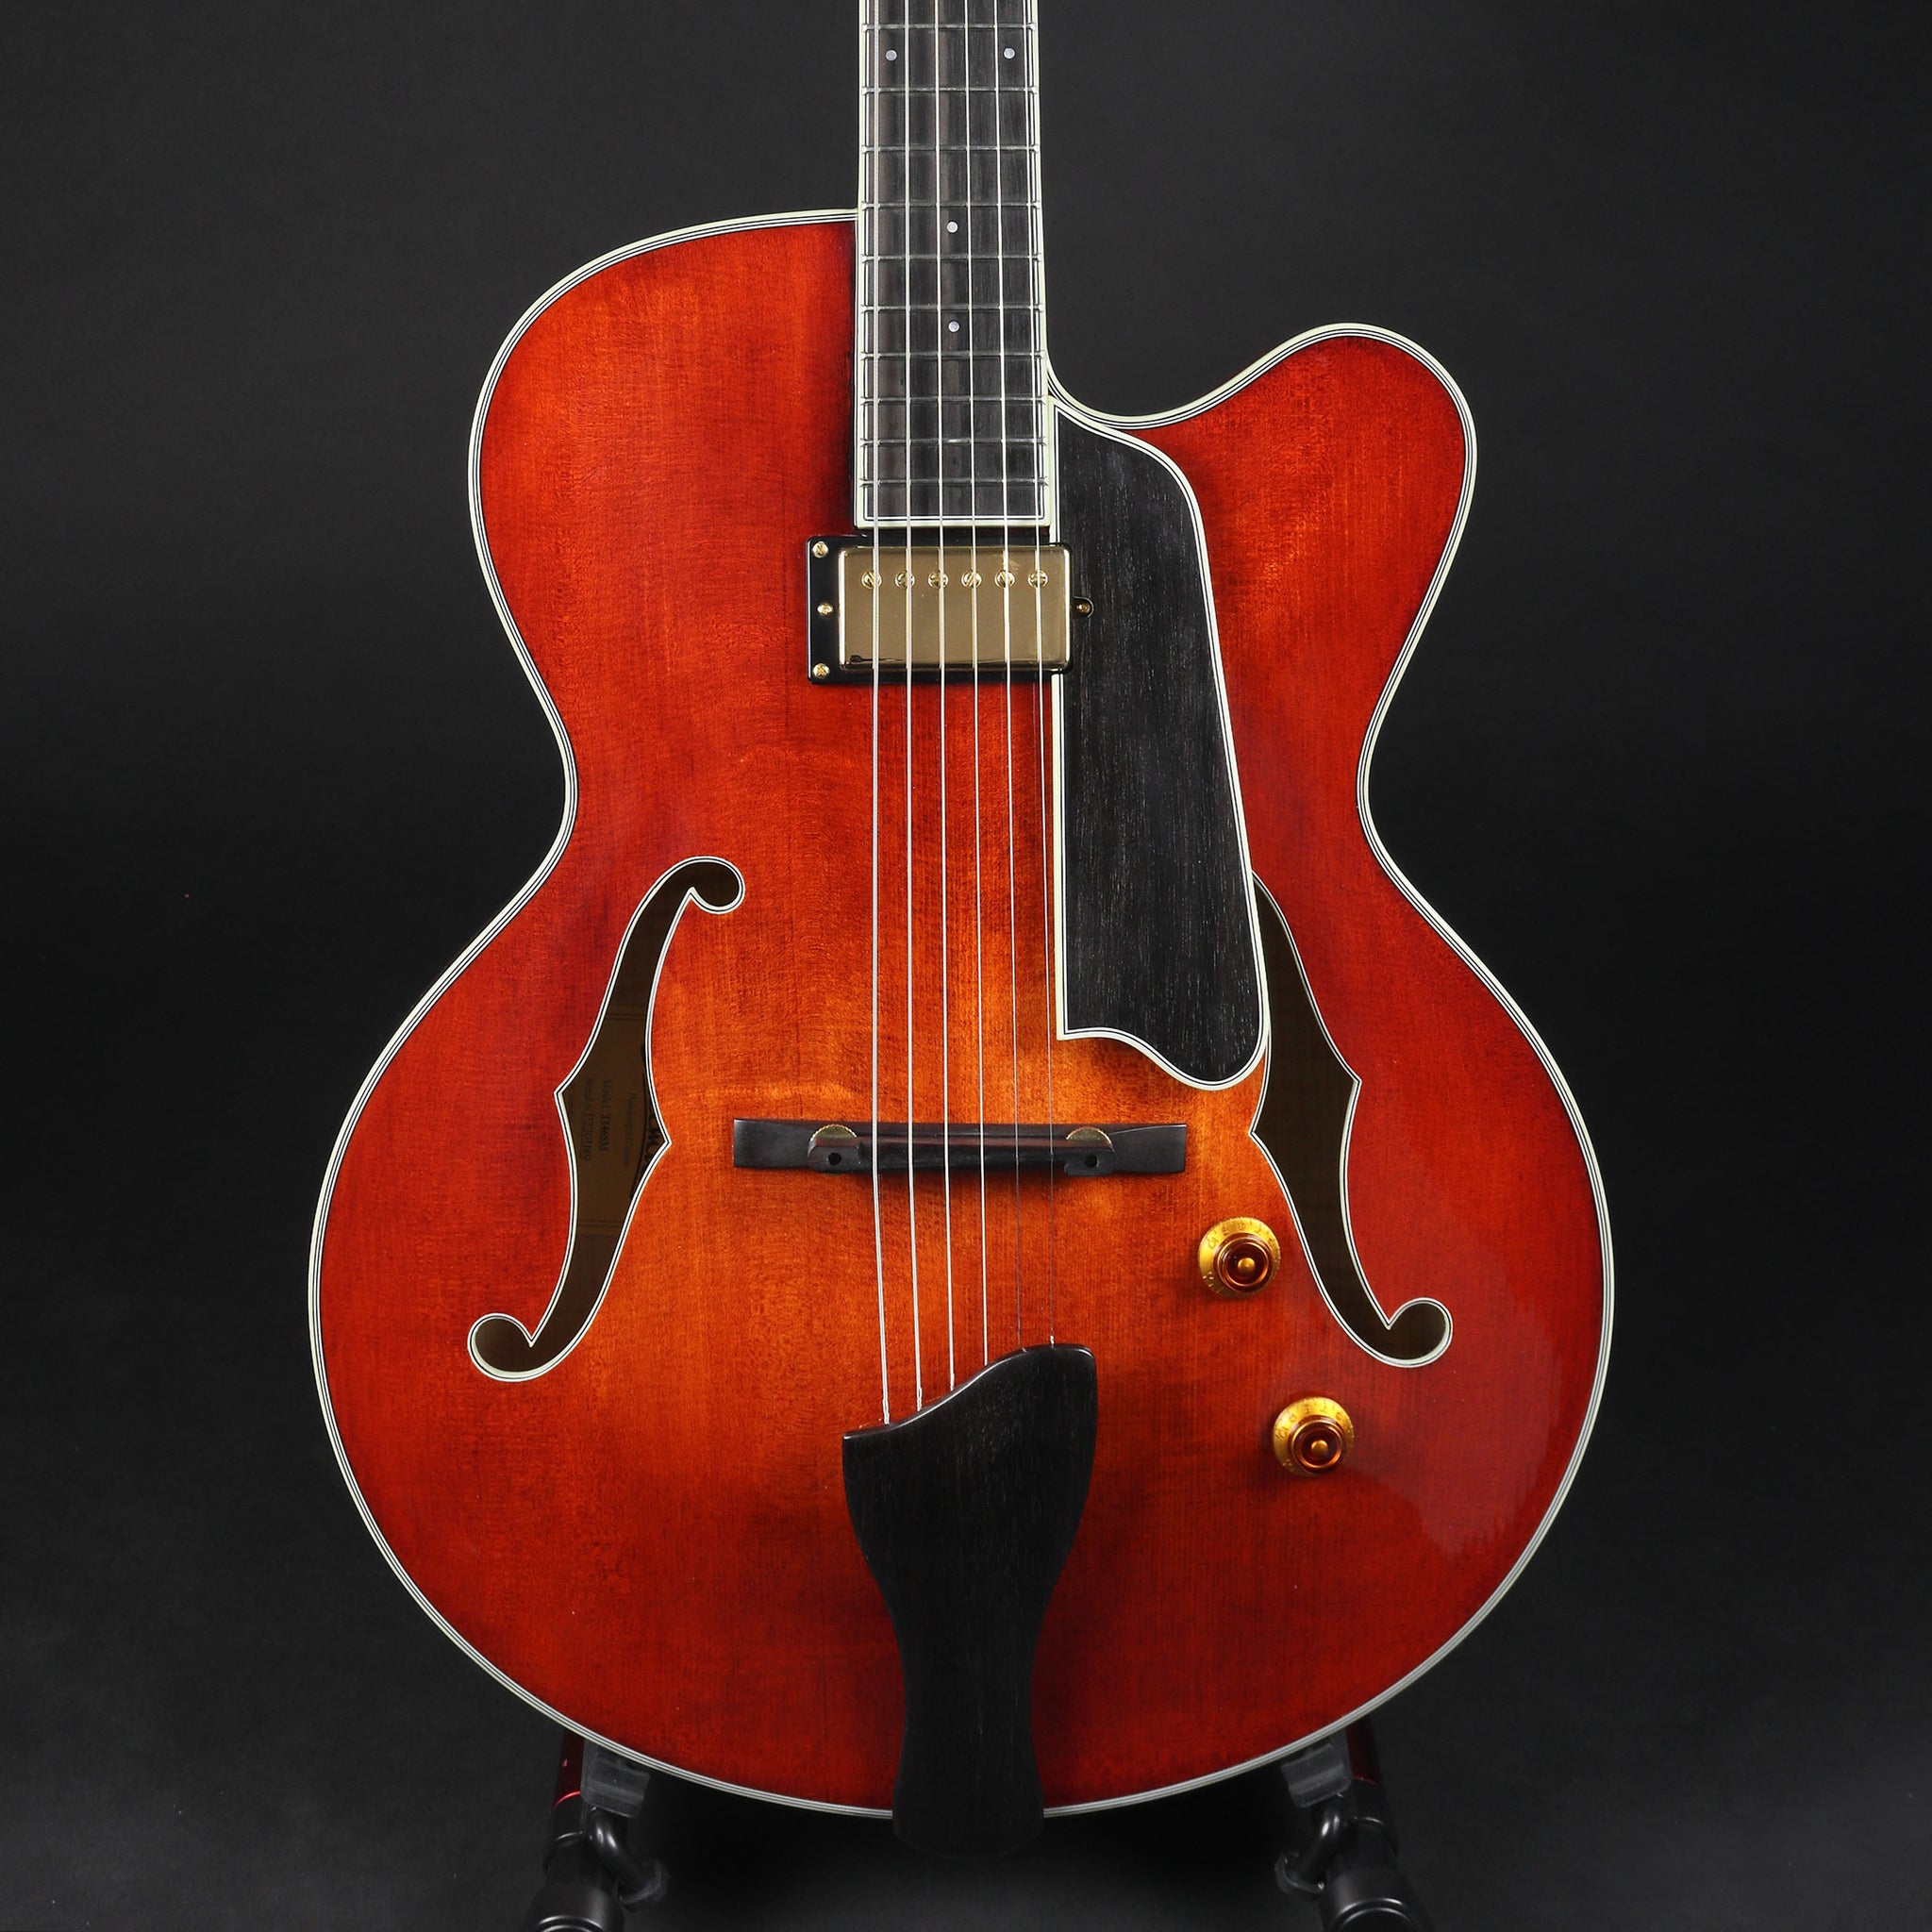 Eastman T146SM 16" Hollow Body Archtop - Classic #1189